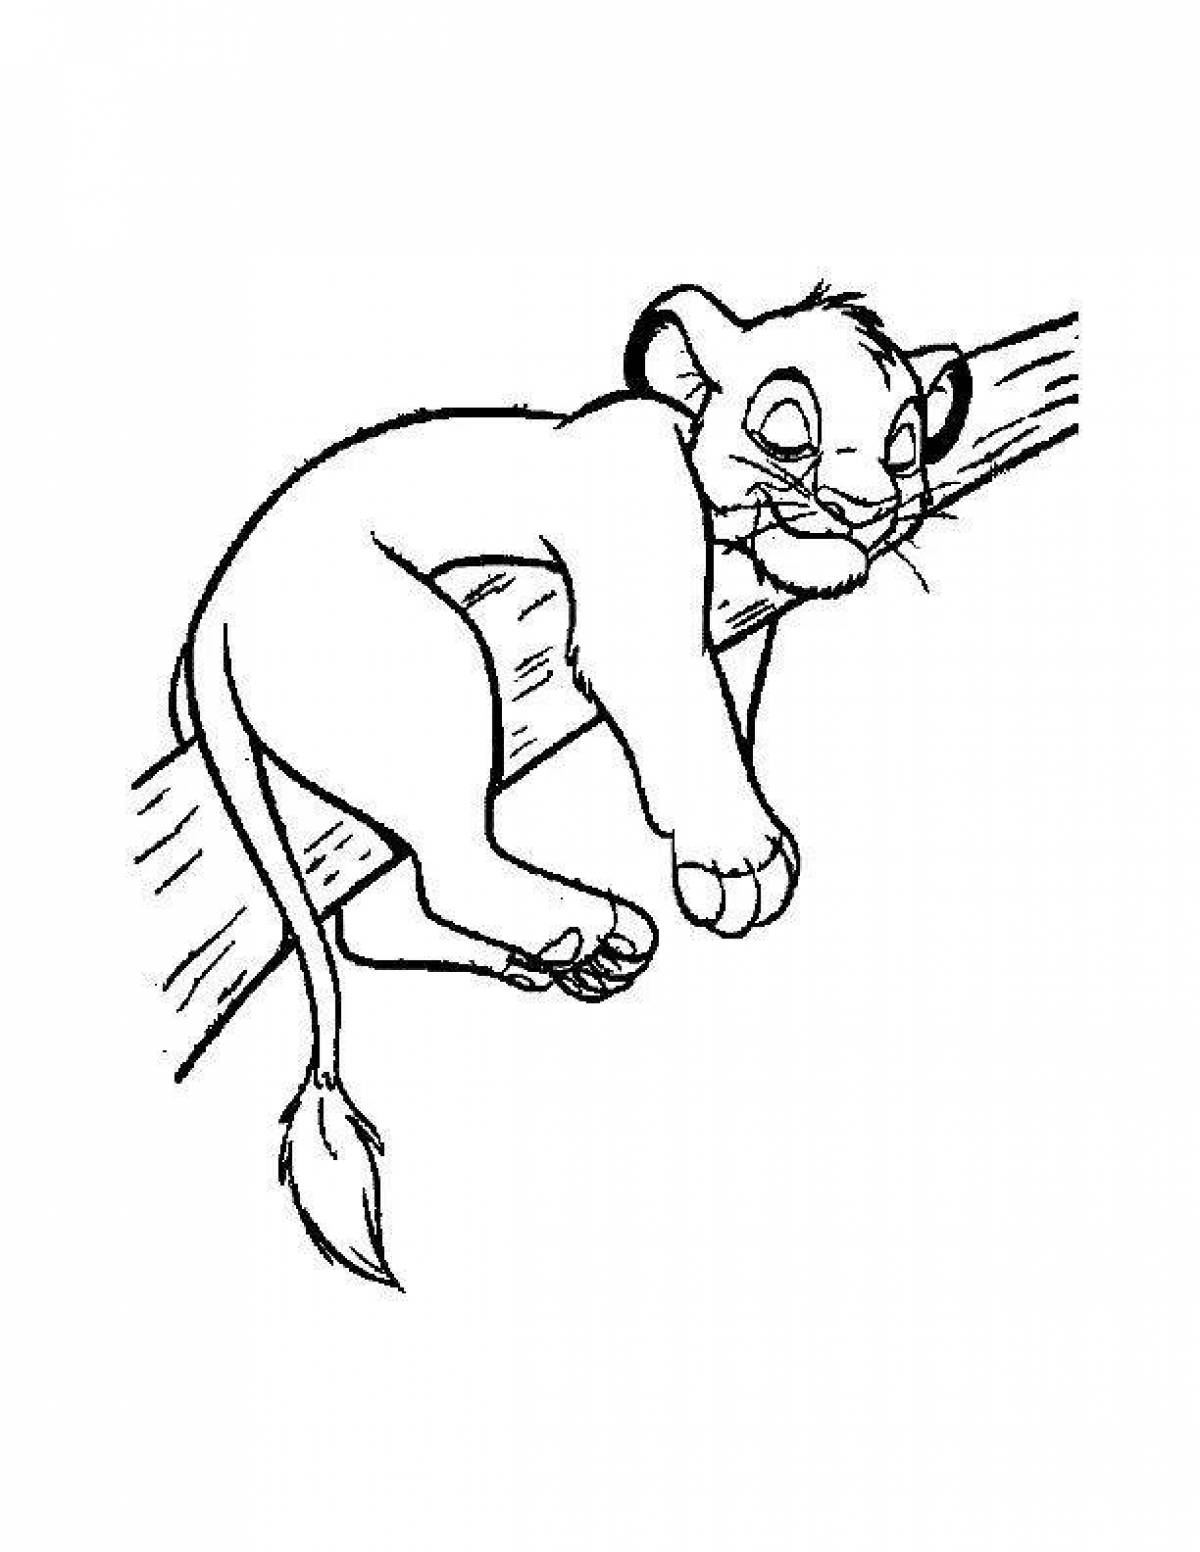 Lion from the lion king #6